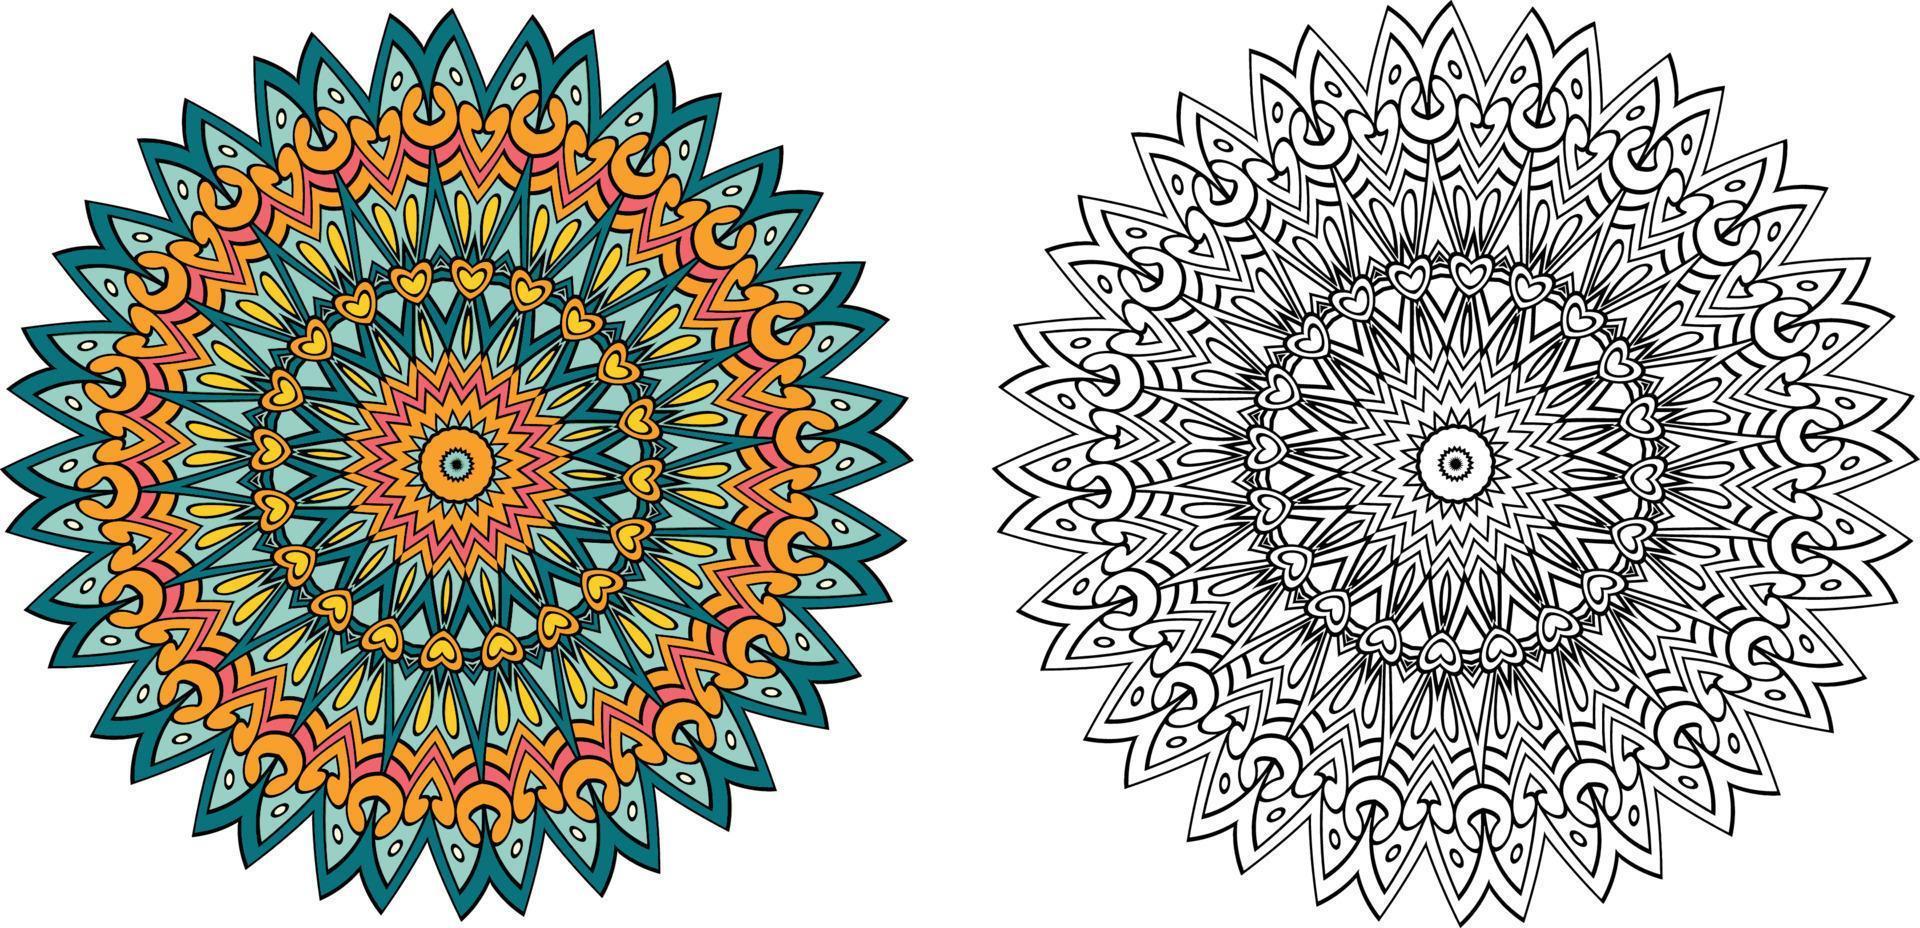 Mandala Coloring Book. Wallpaper Design, Tile Pattern, Shirt, Greeting Card, Sticker, Lace Pattern And Tattoo. Decoration For Interior Design. vector